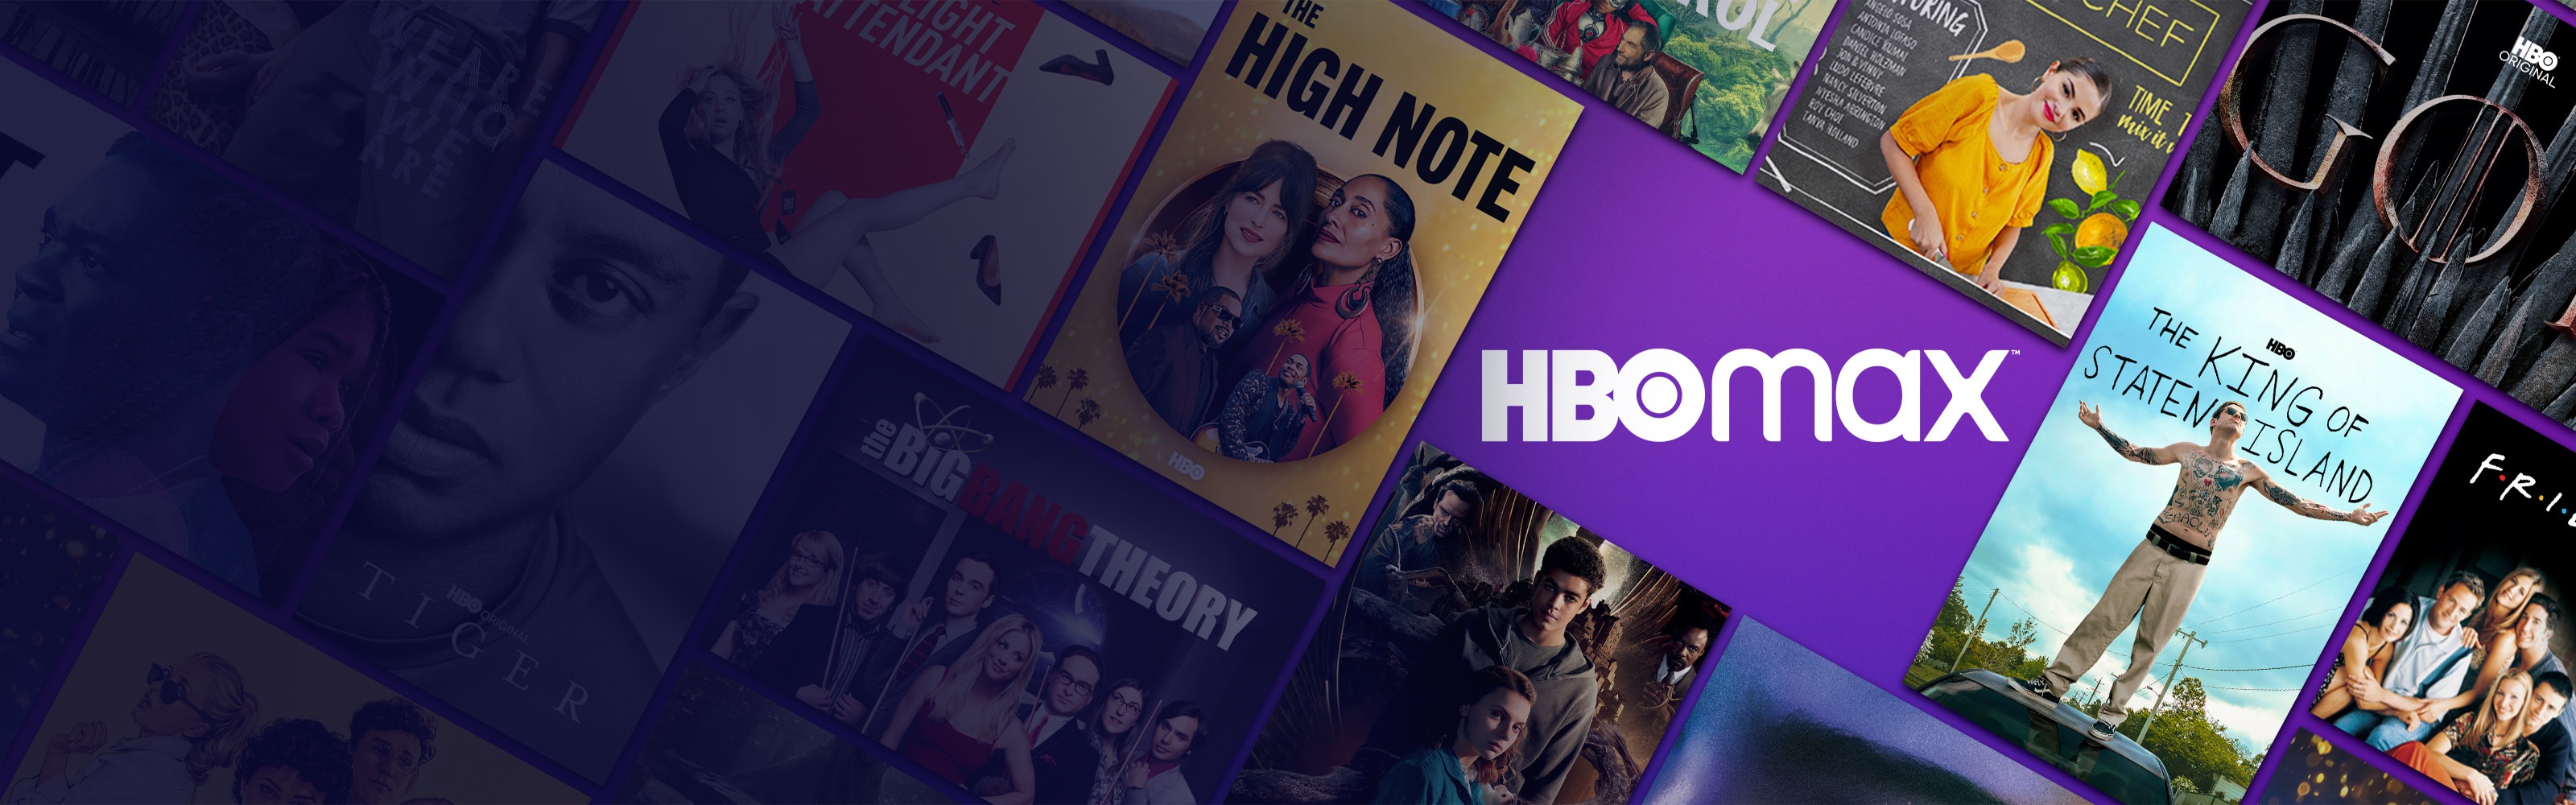 hbo max 6-month subscription